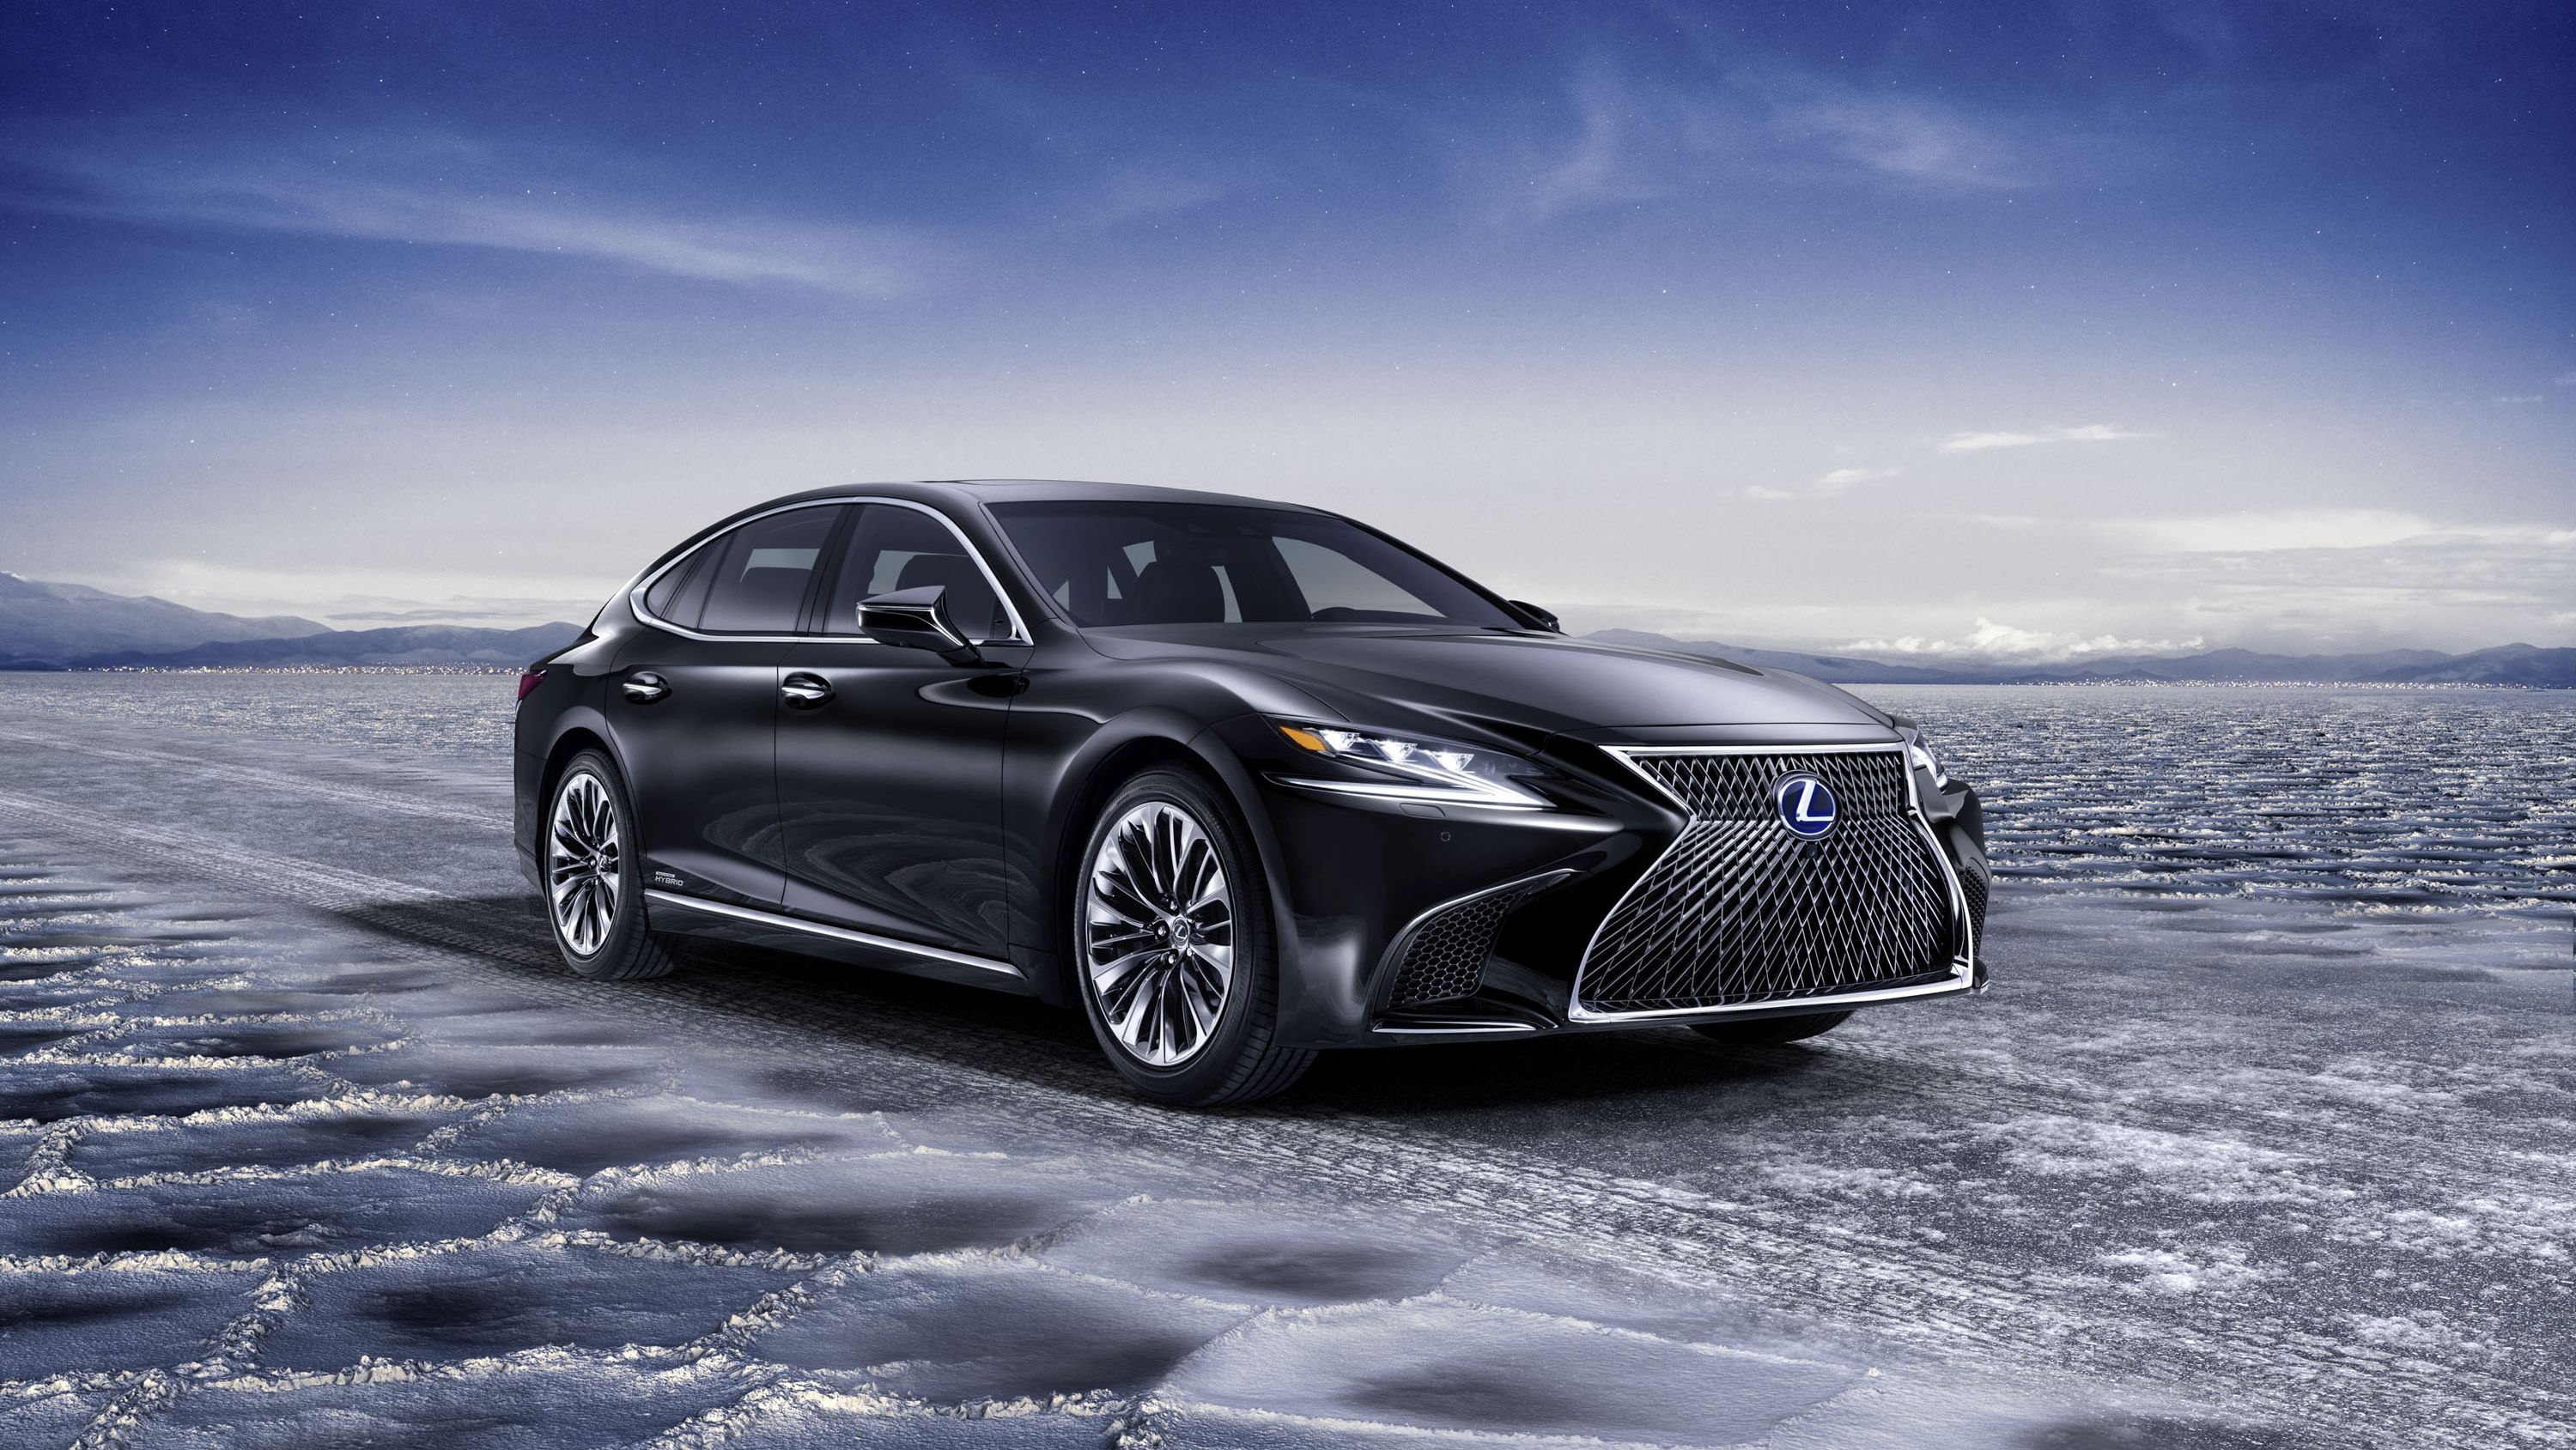 The 2018 Lexus LS 500h Is Further Proof That The Hybrids Are Taking Over